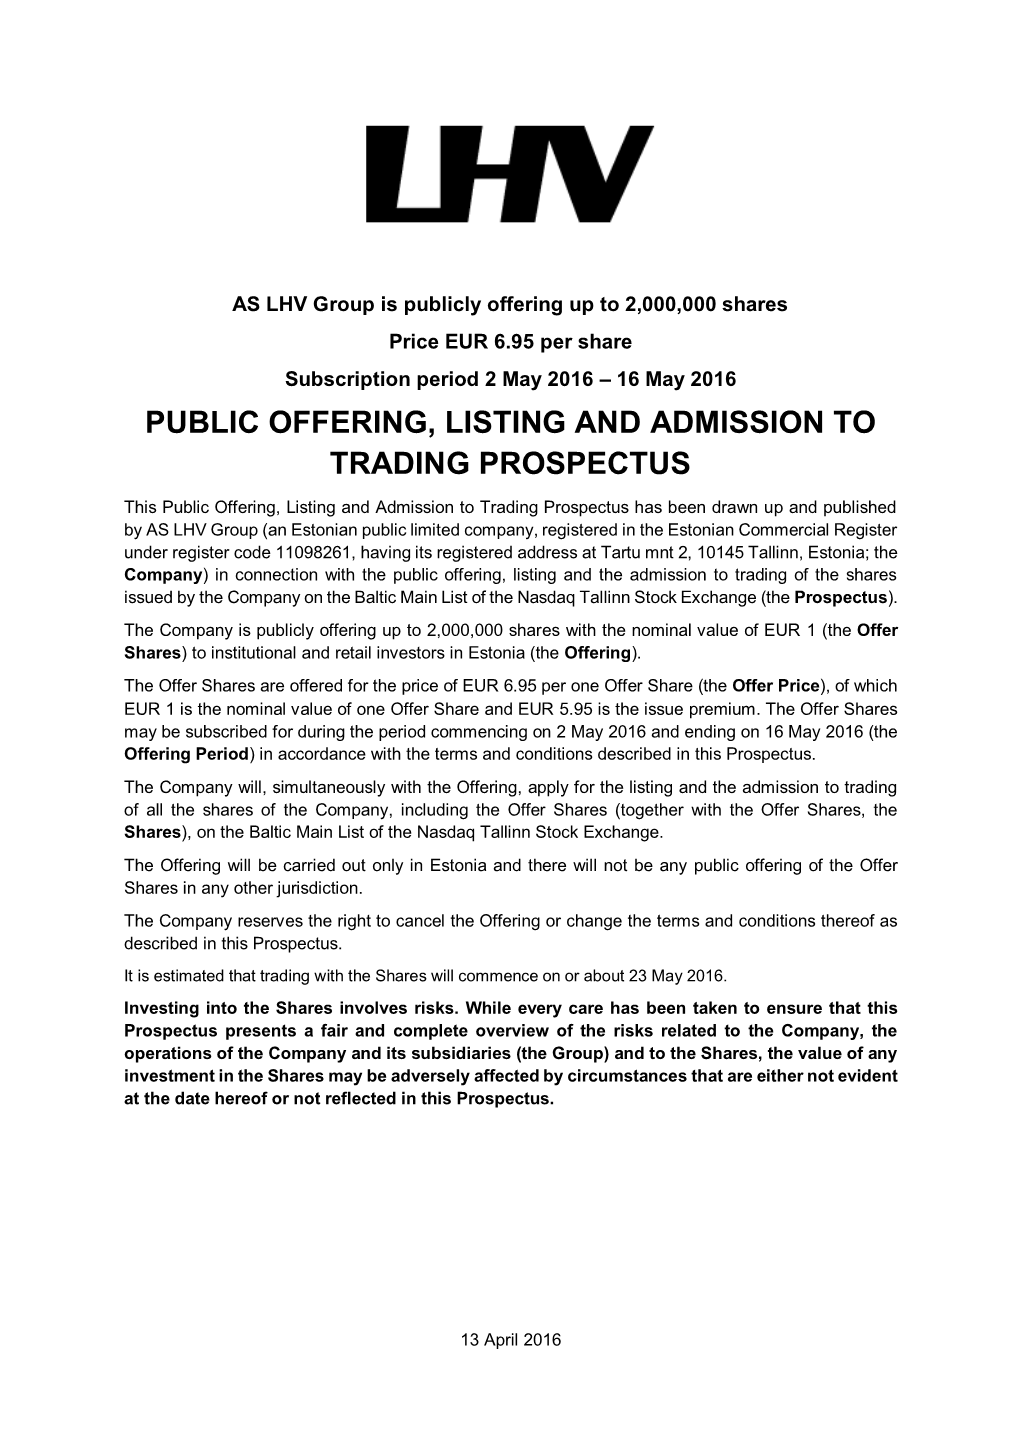 Public Offering, Listing and Admission to Trading Prospectus